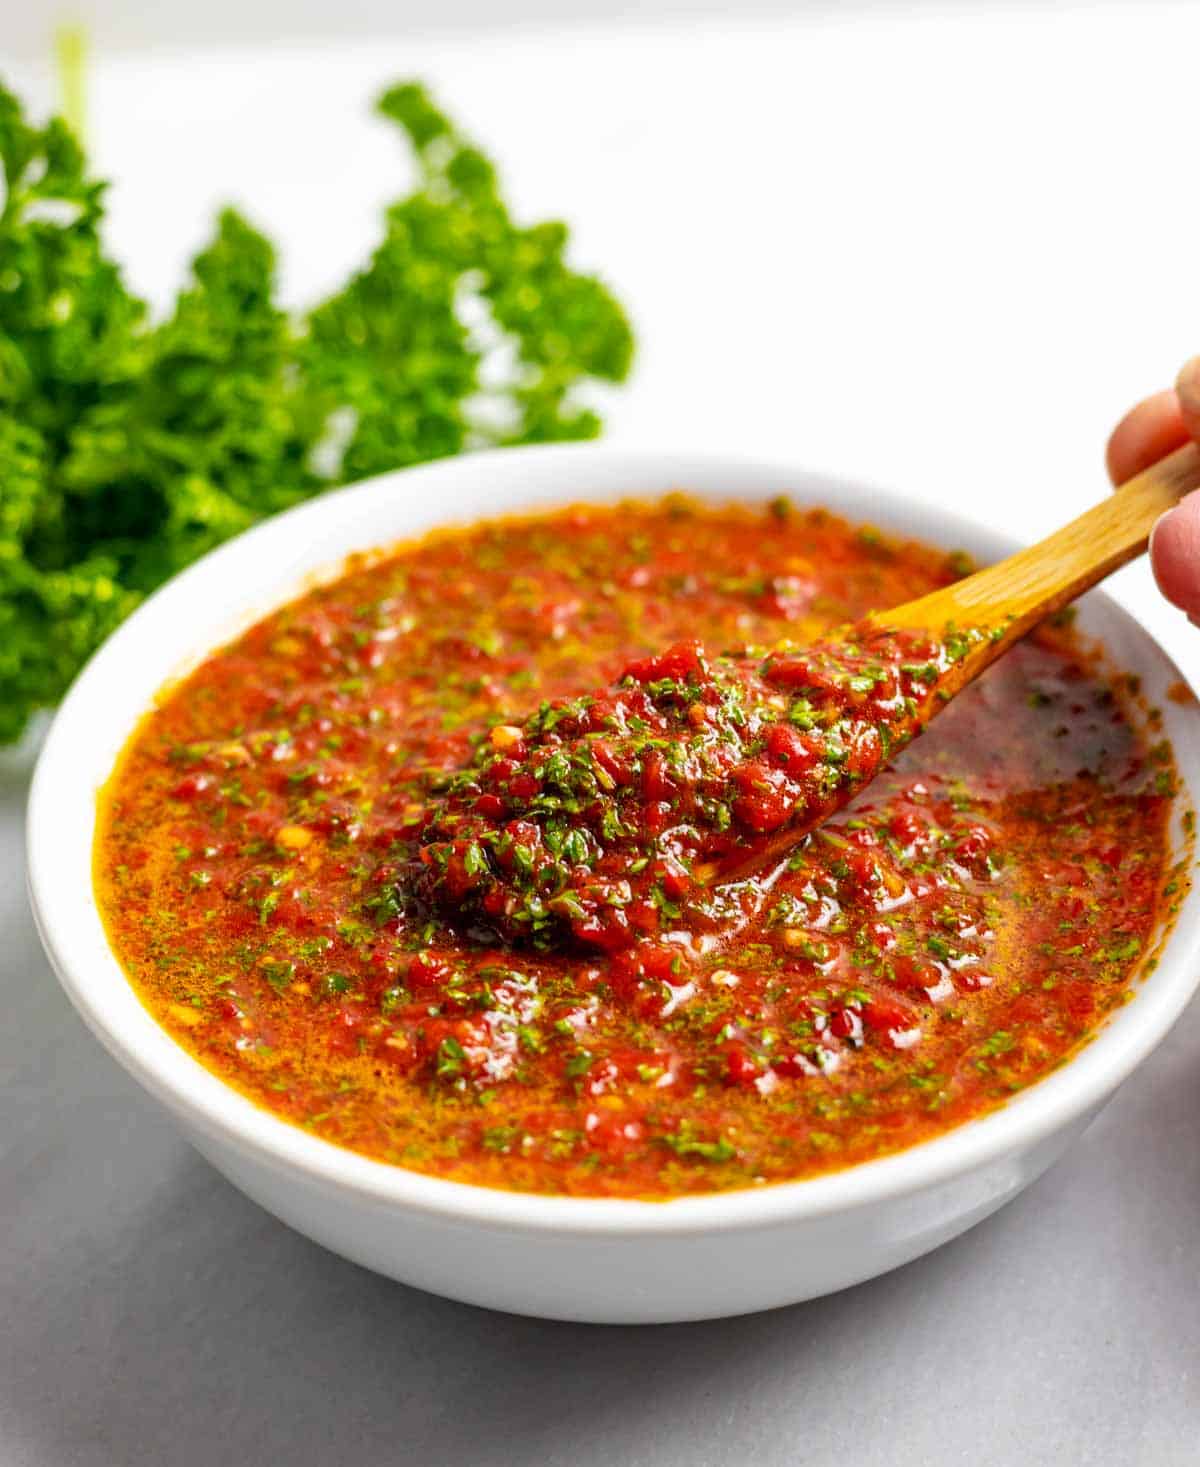 White bowl of chimichurri rojo with a hand lifting a small wood spoon full of delicious red and green sauce.